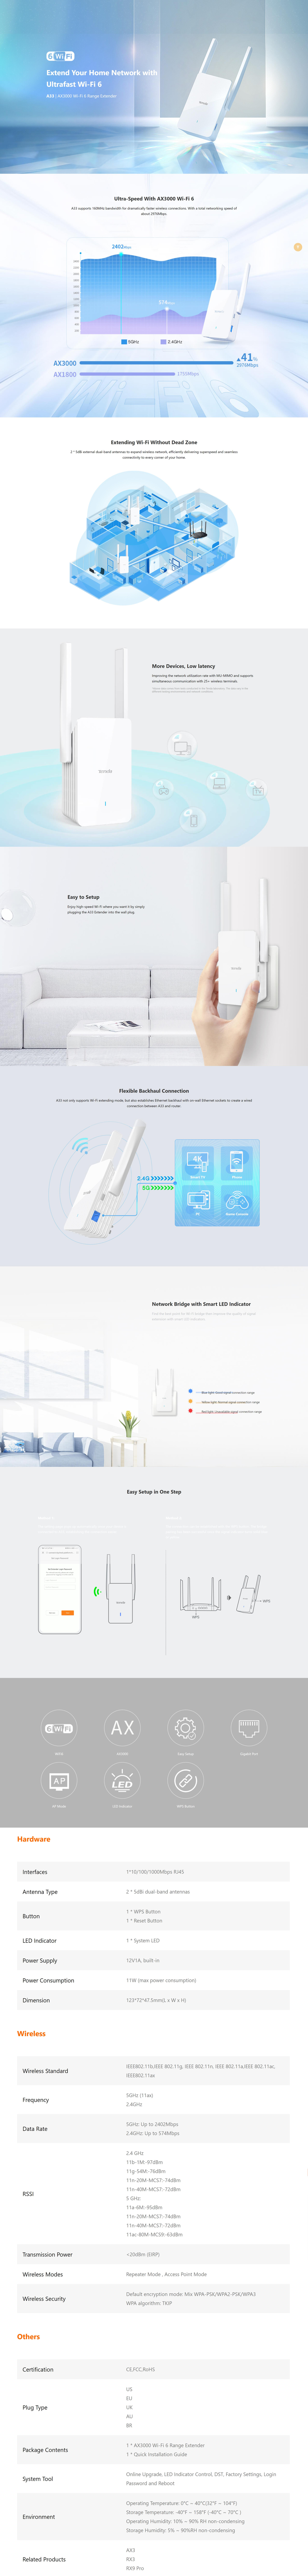 A large marketing image providing additional information about the product Tenda A33 AX3000 Wi-Fi 6 Range Extender - Additional alt info not provided